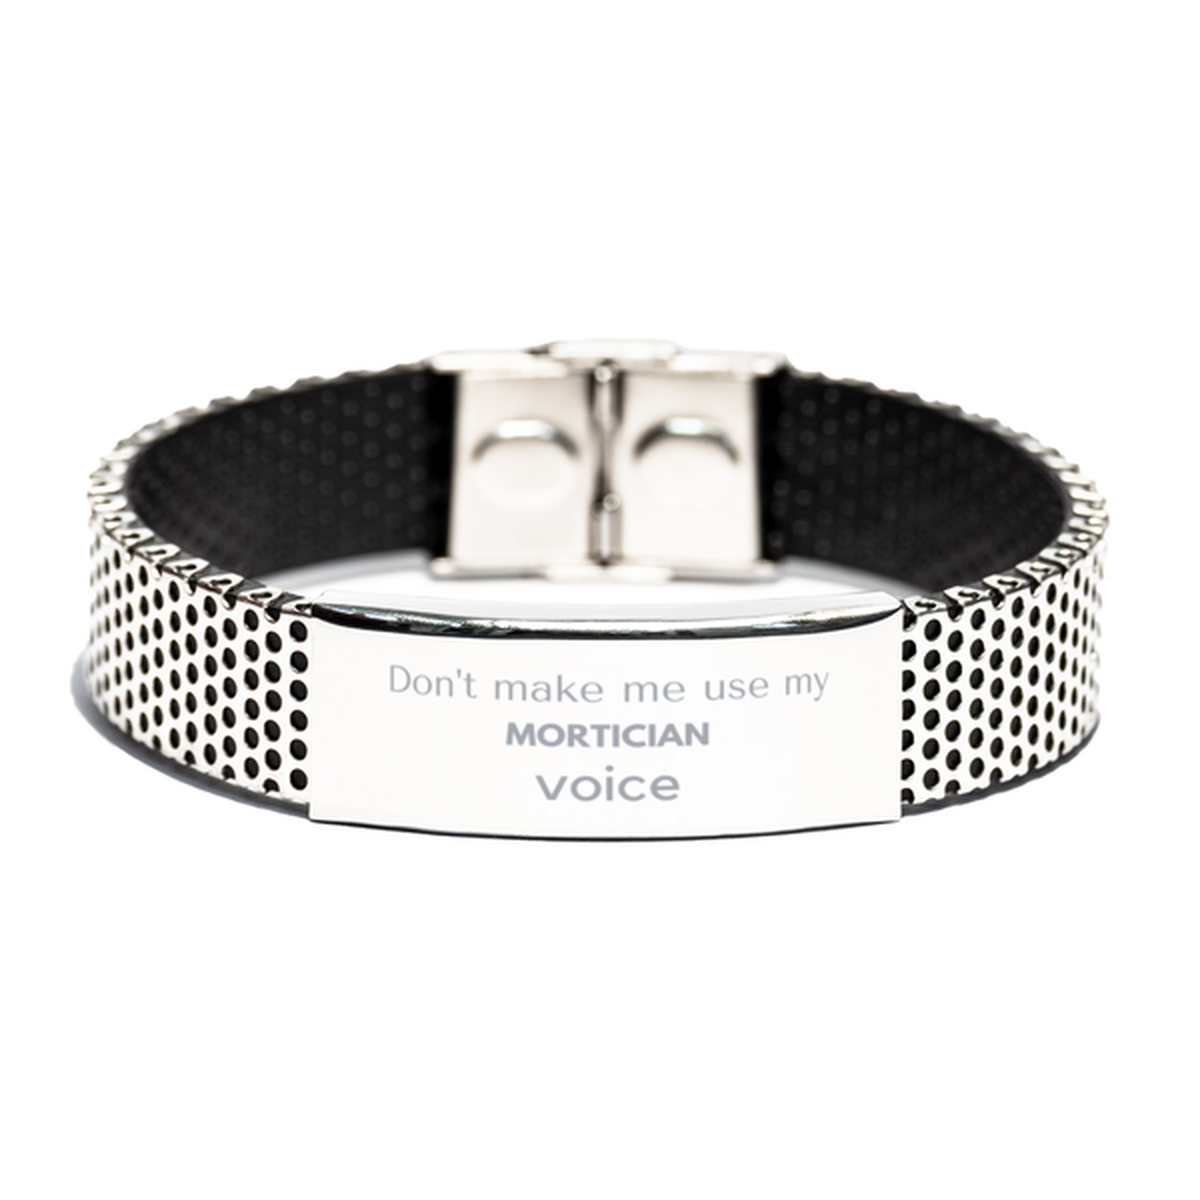 Don't make me use my Mortician voice, Sarcasm Mortician Gifts, Christmas Mortician Stainless Steel Bracelet Birthday Unique Gifts For Mortician Coworkers, Men, Women, Colleague, Friends